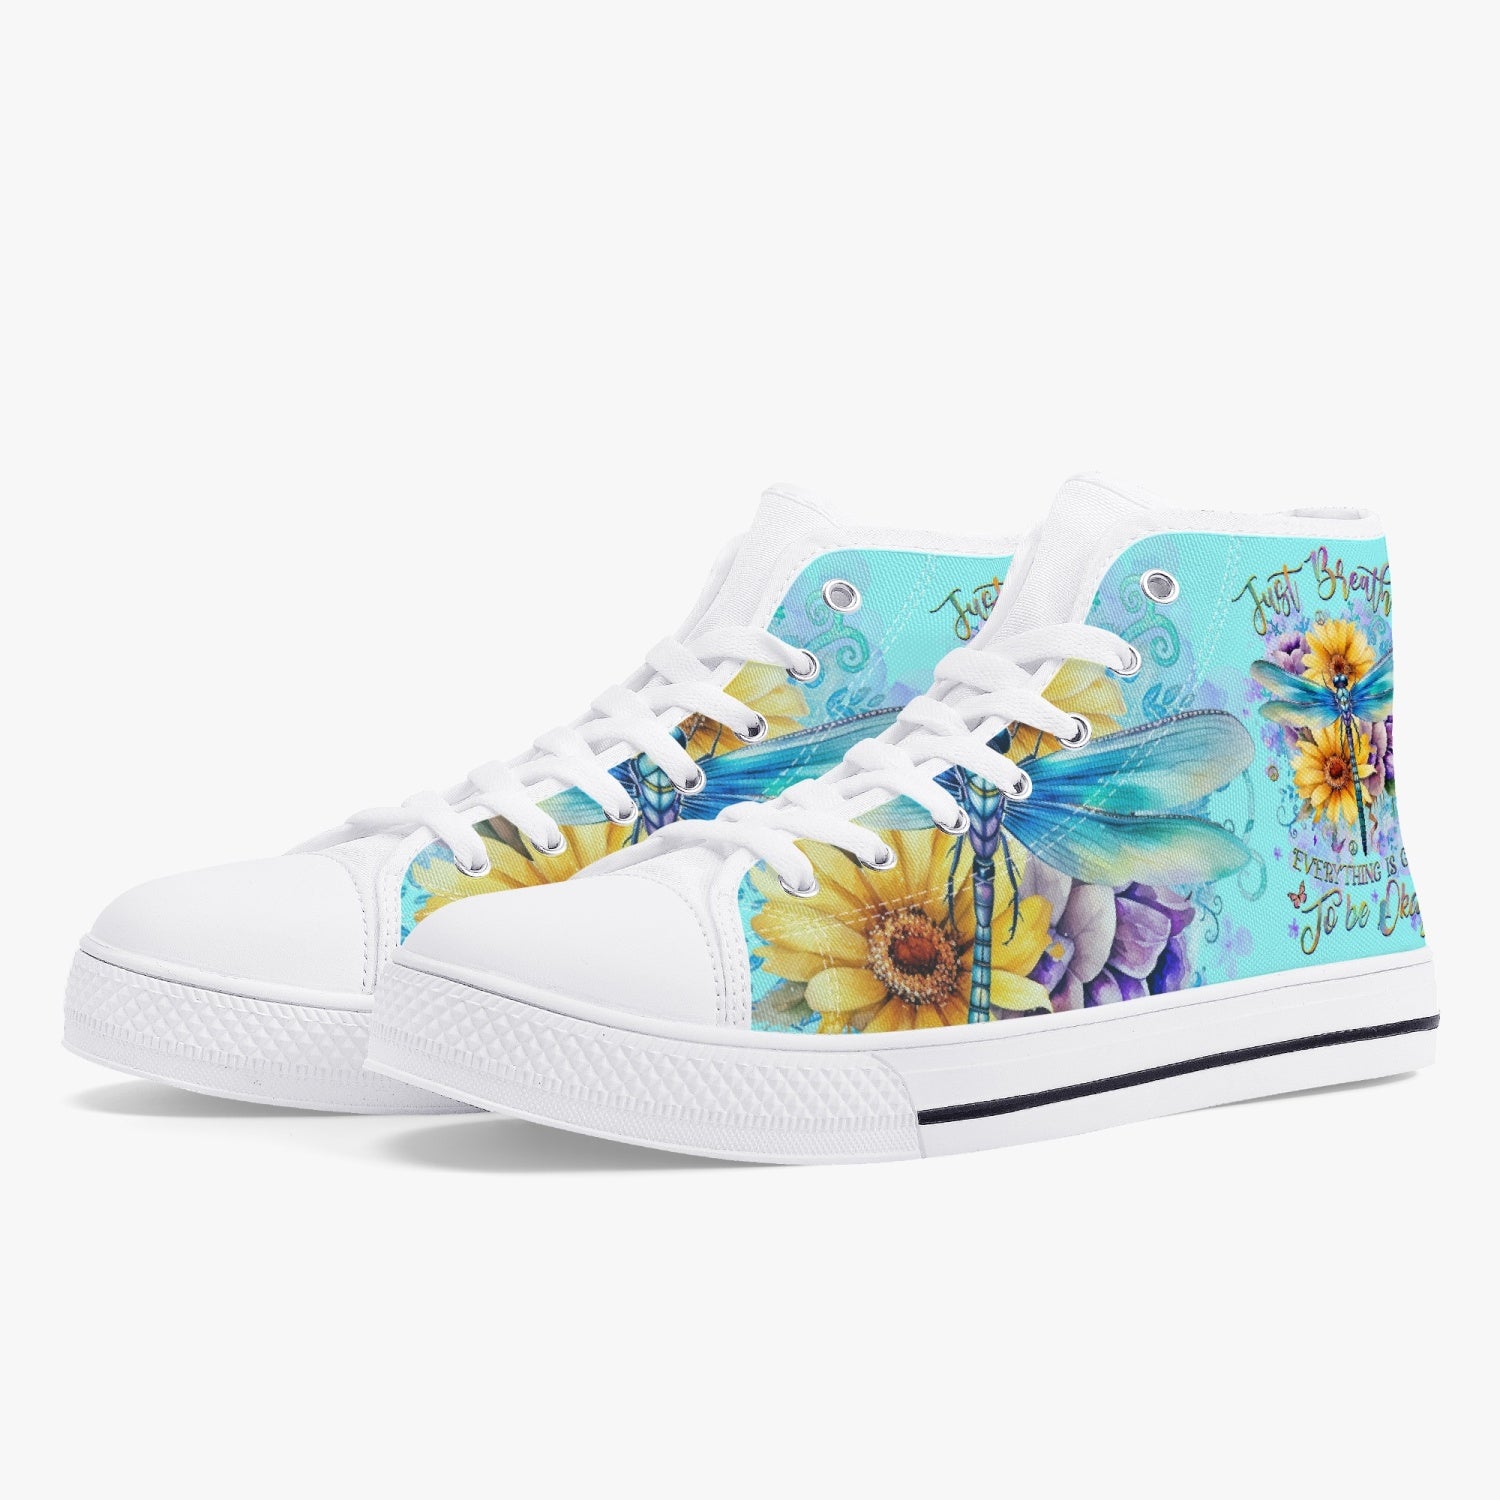 JUST BREATHE DRAGONFLY HIGH TOP CANVAS SHOES - YH0210233